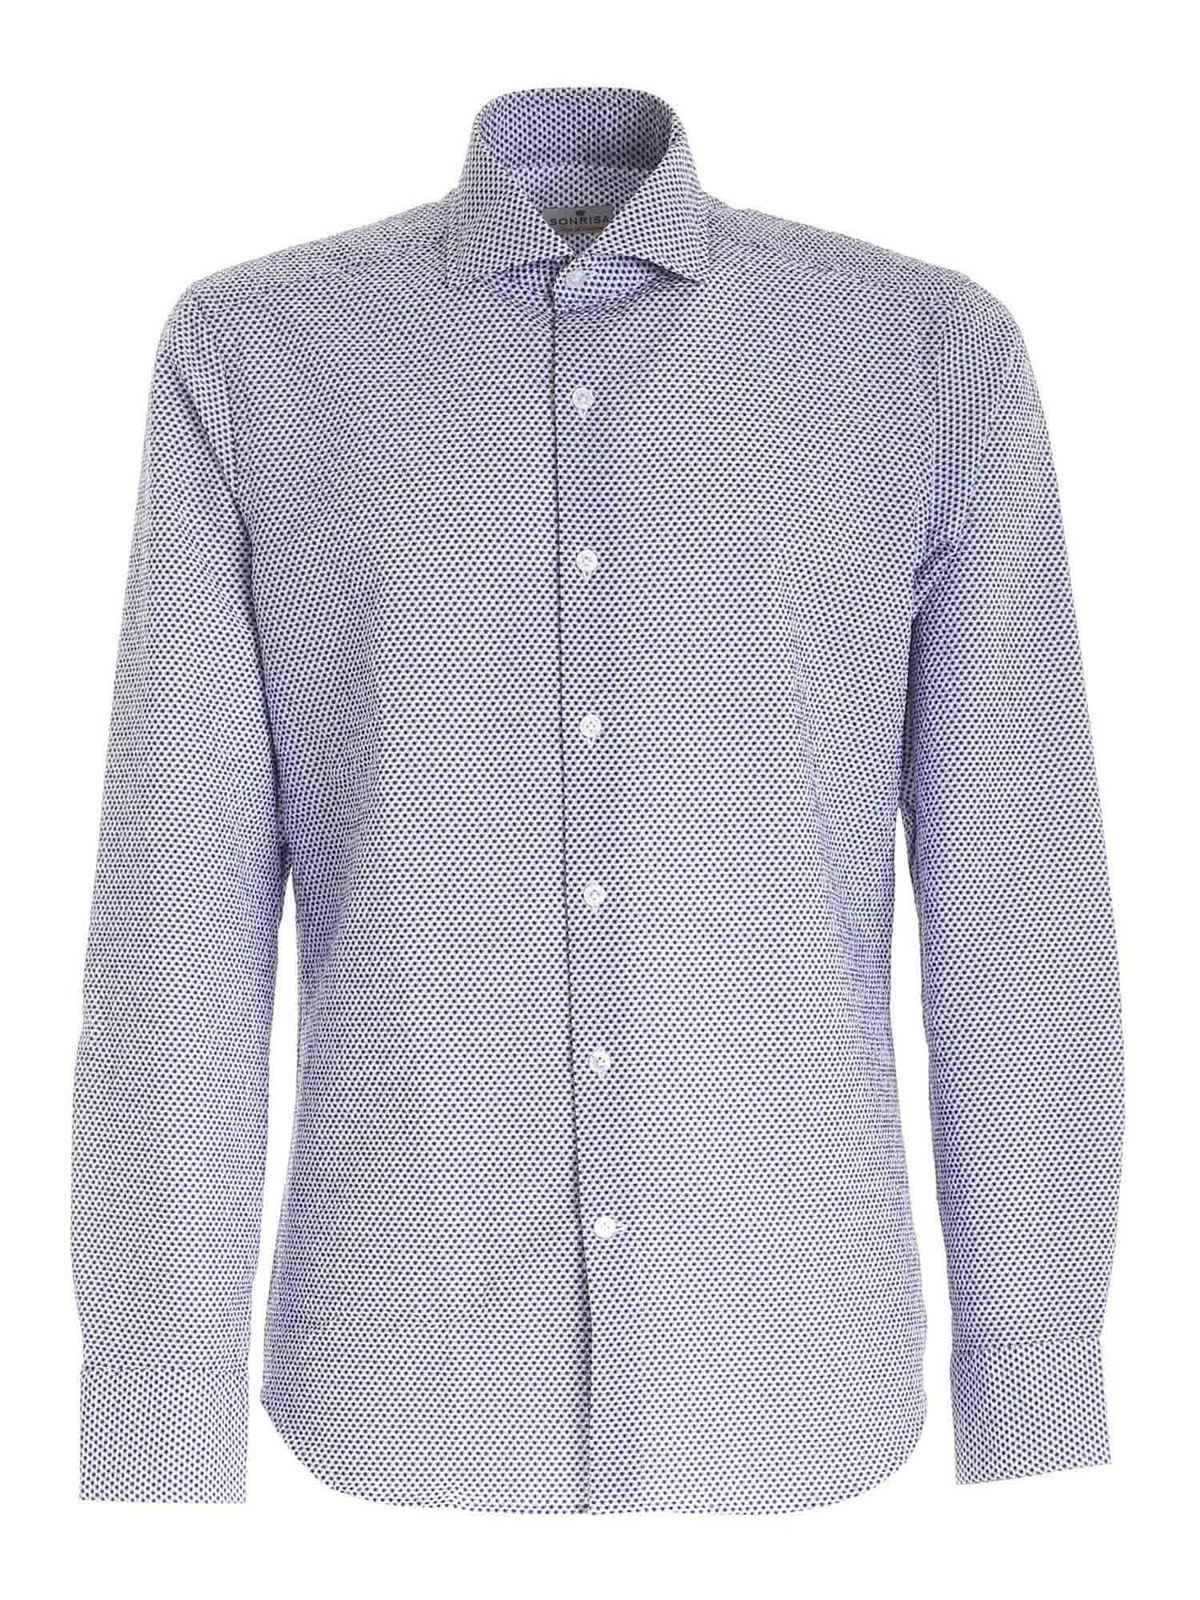 Sonrisa - Micro pattern shirt in in white and blue - shirts ...